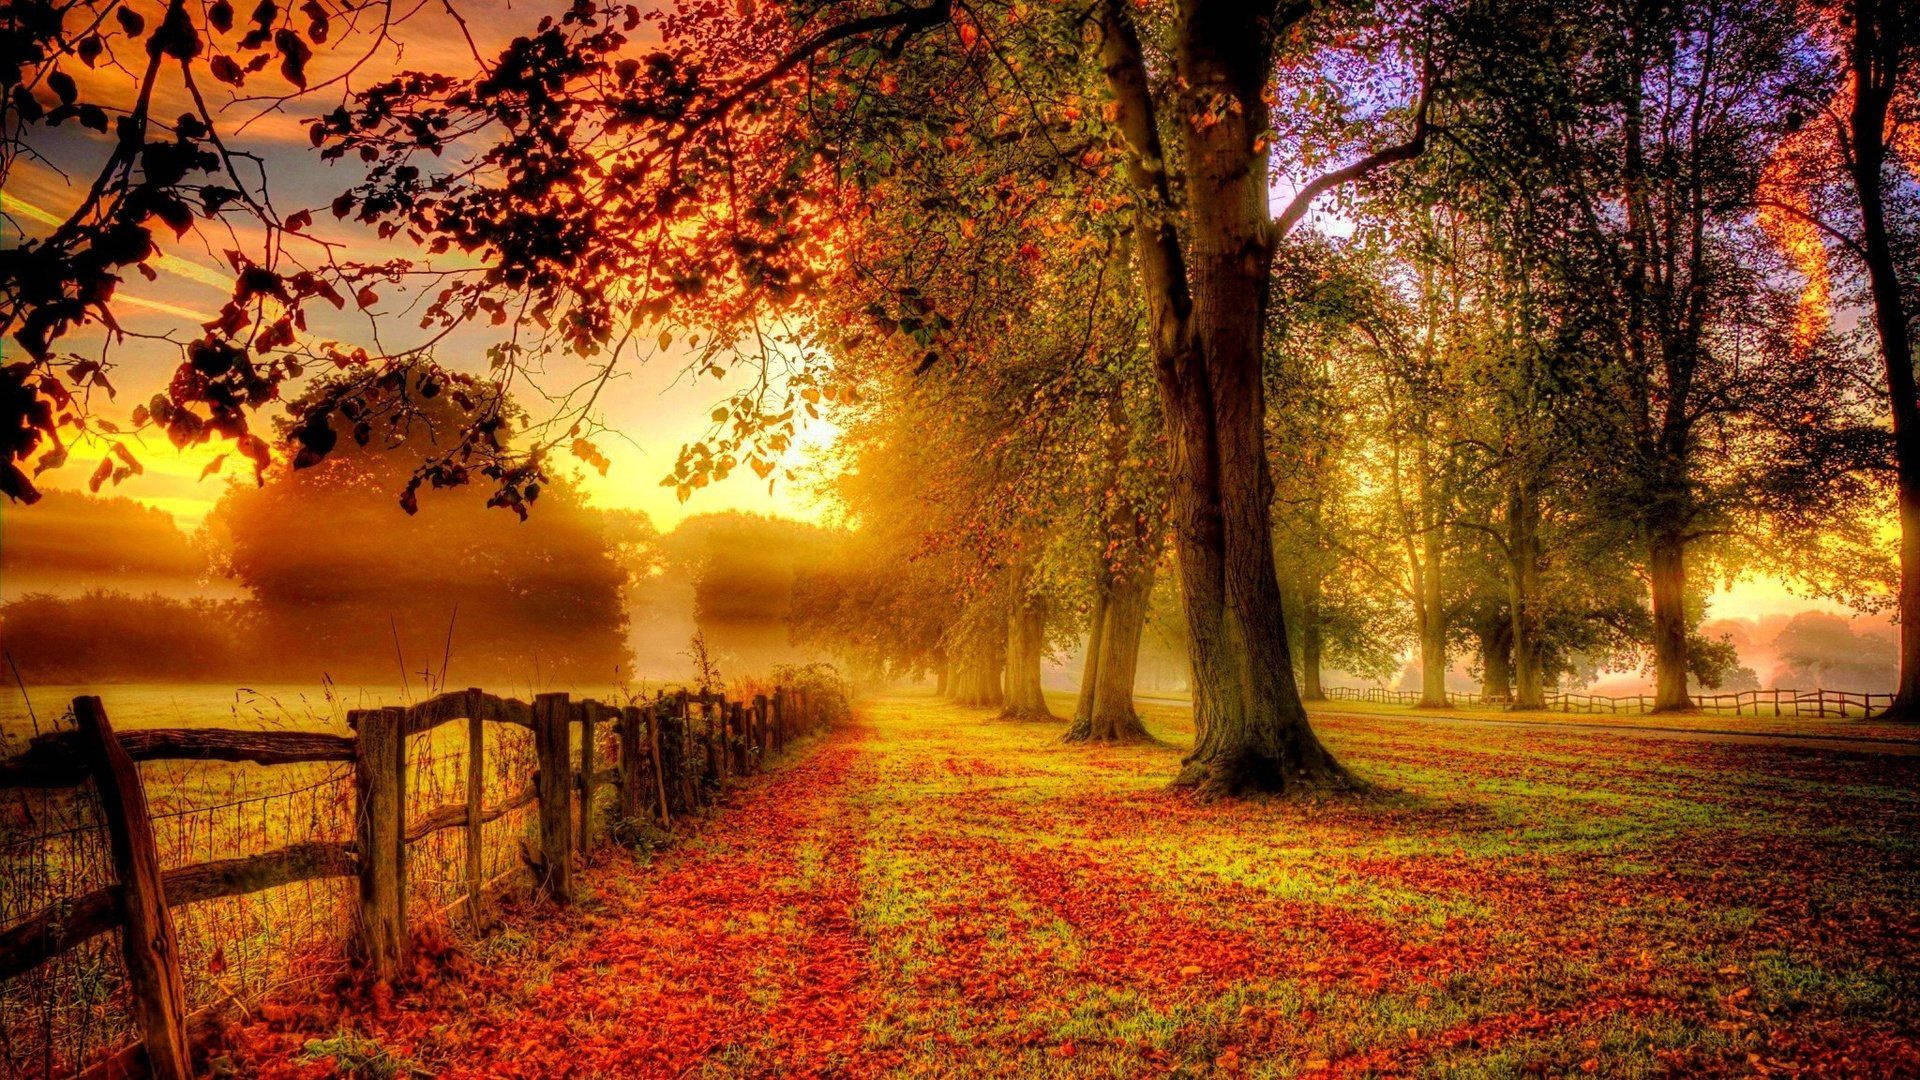 Free Autumn Wallpaper Downloads, [500+] Autumn Wallpapers for FREE |  